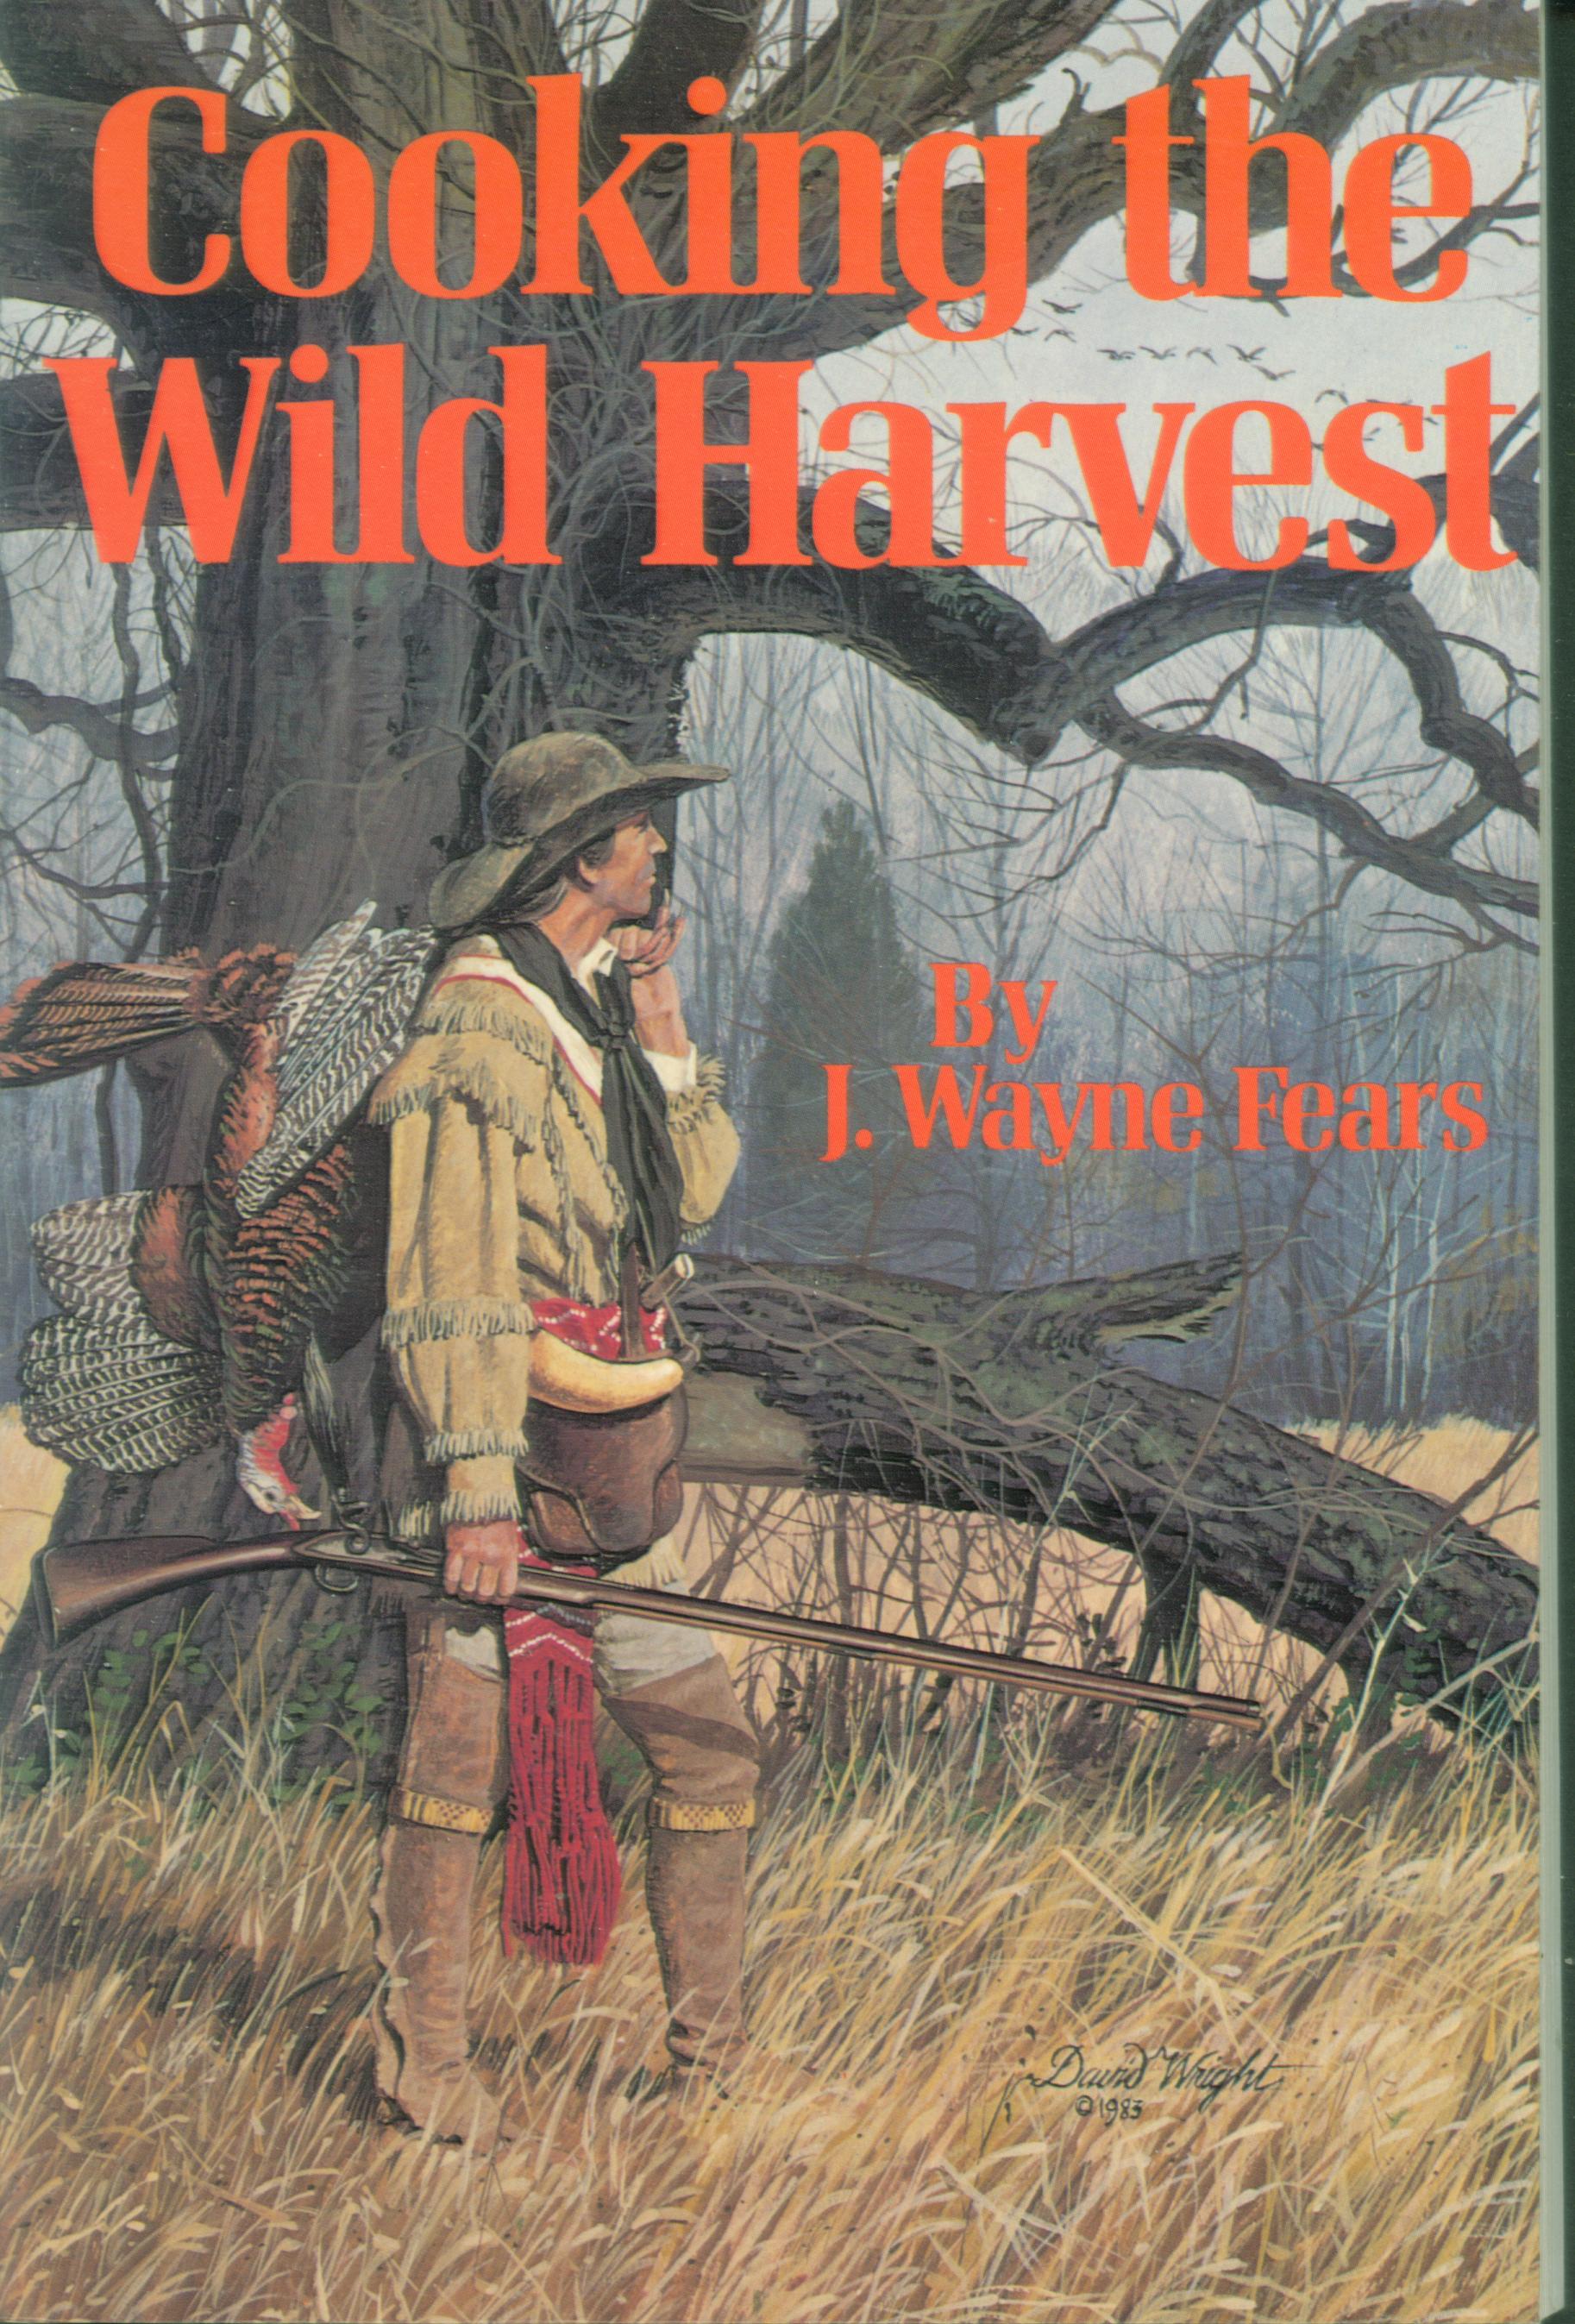 COOKING THE WILD HARVEST. 